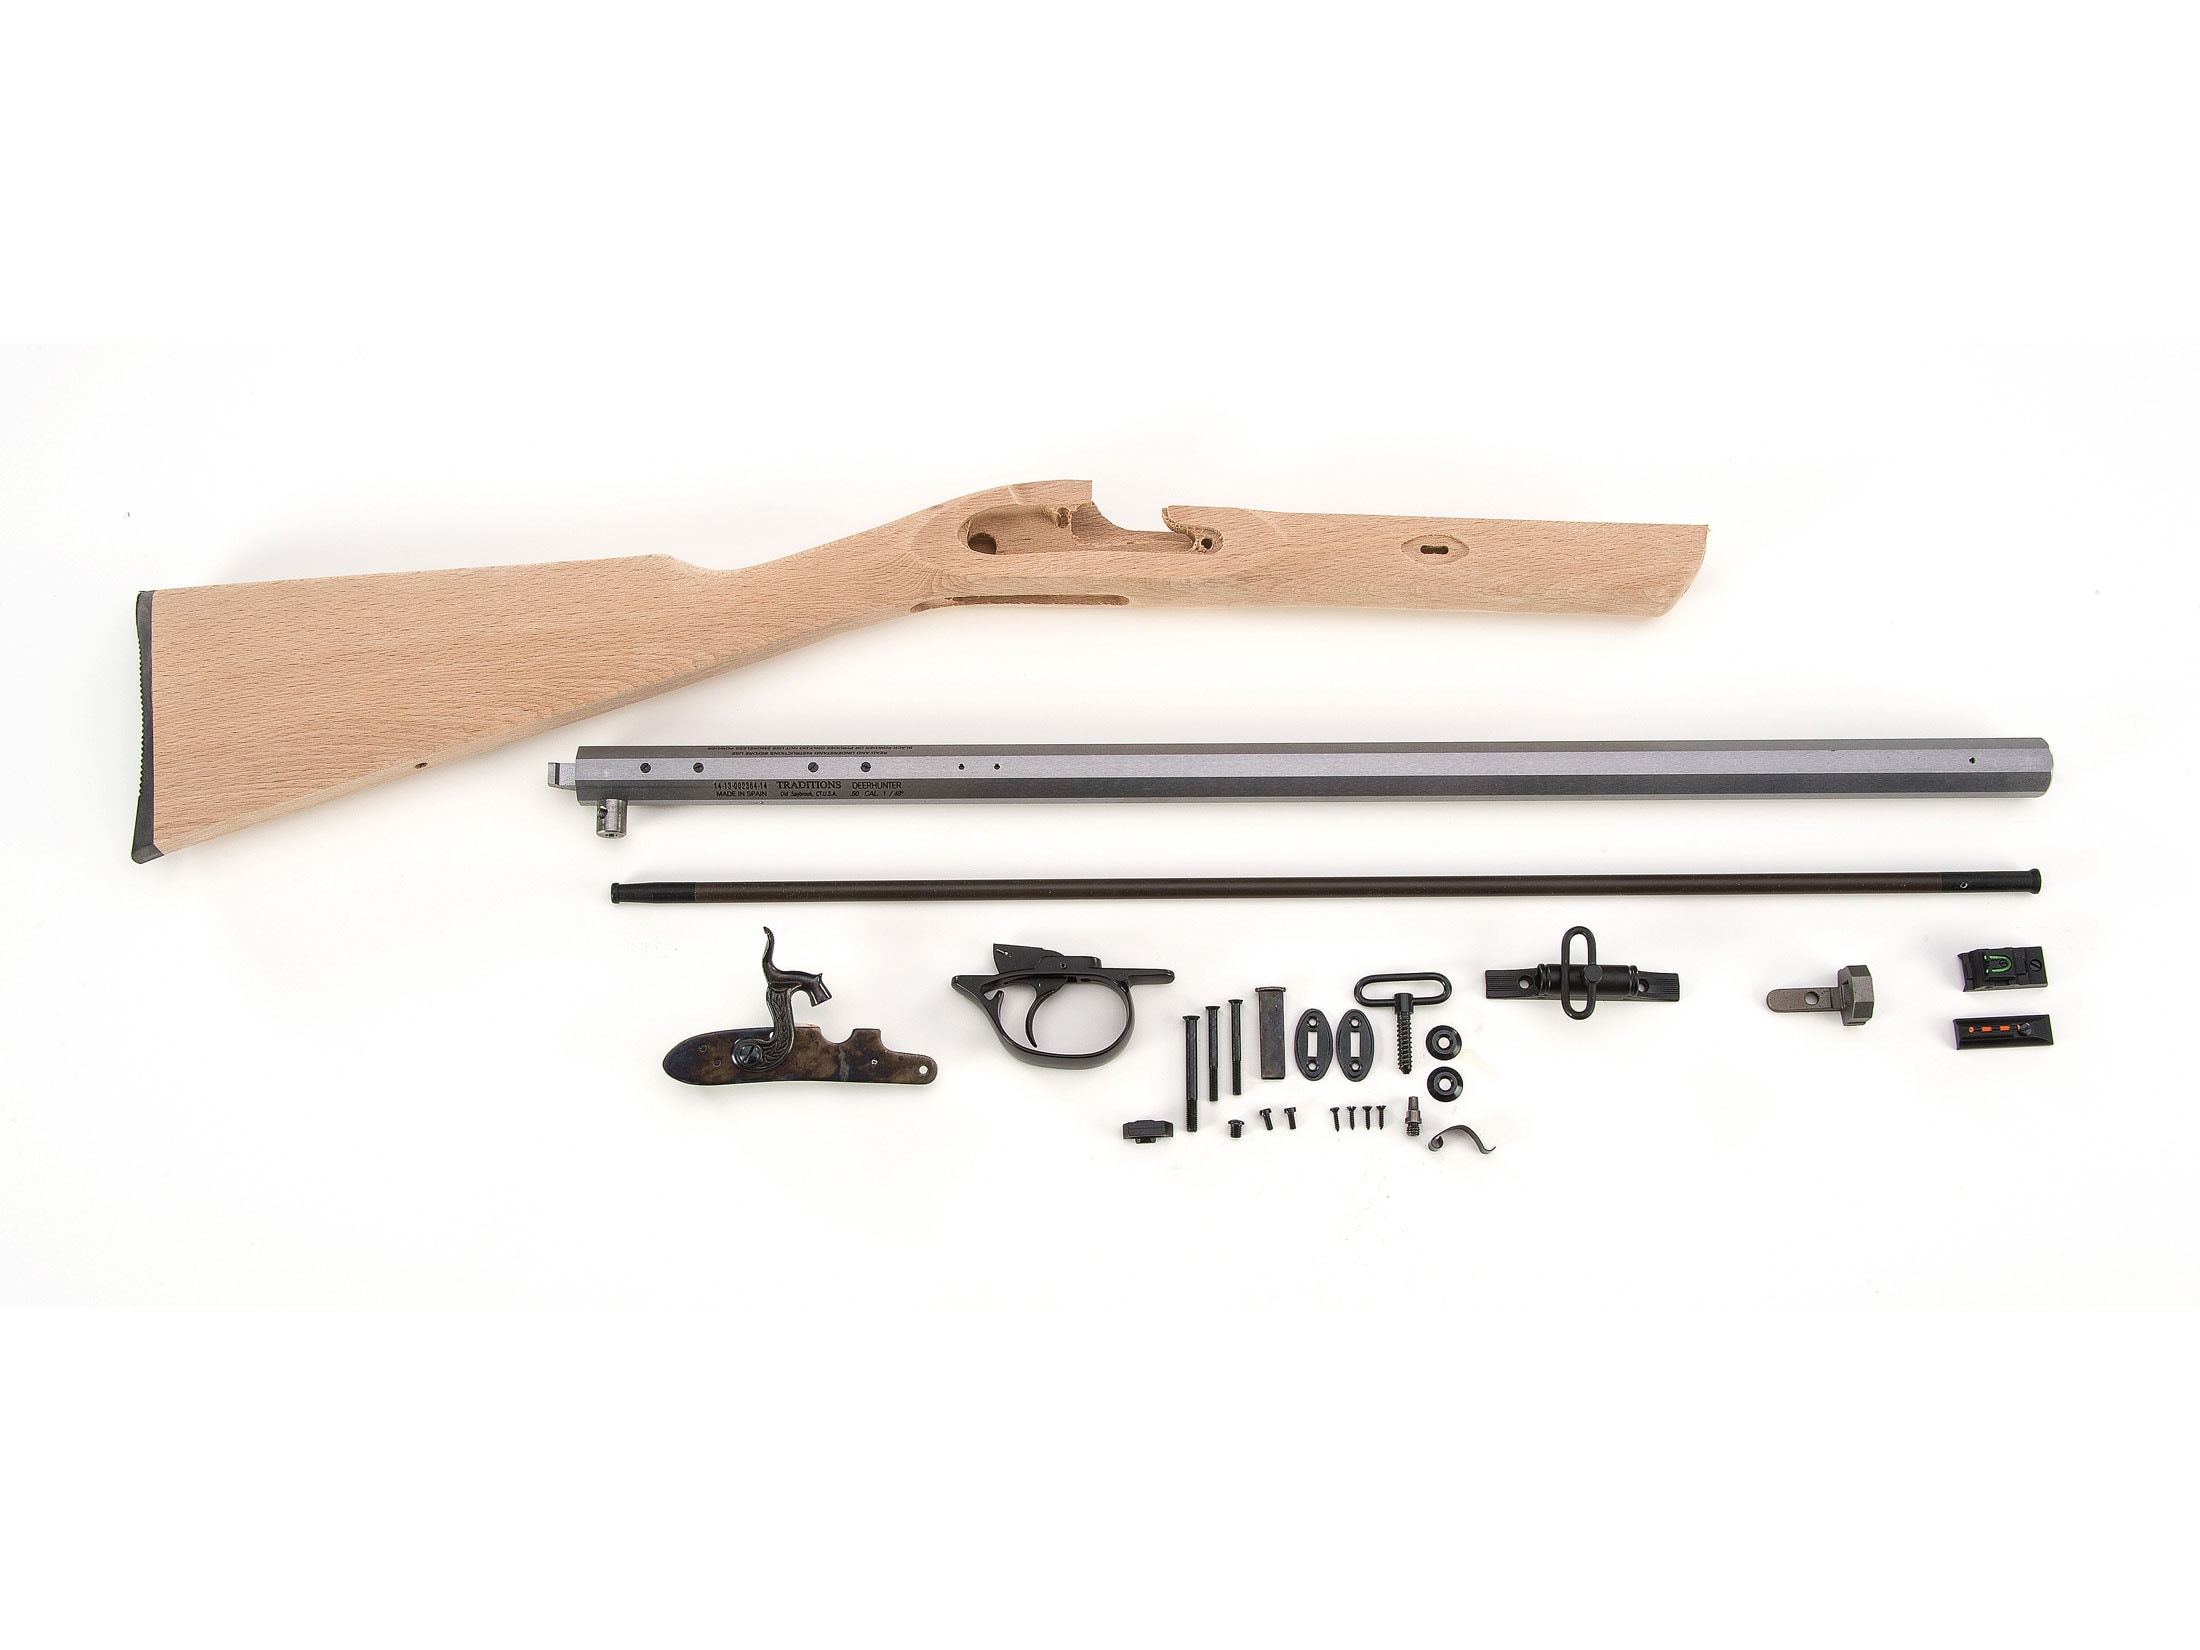 Image of Traditions Deerhunter Muzzleloading Rifle Unassembled Kit 50 Caliber Percussion 1 in 48" Twist 24" Barrel in the White